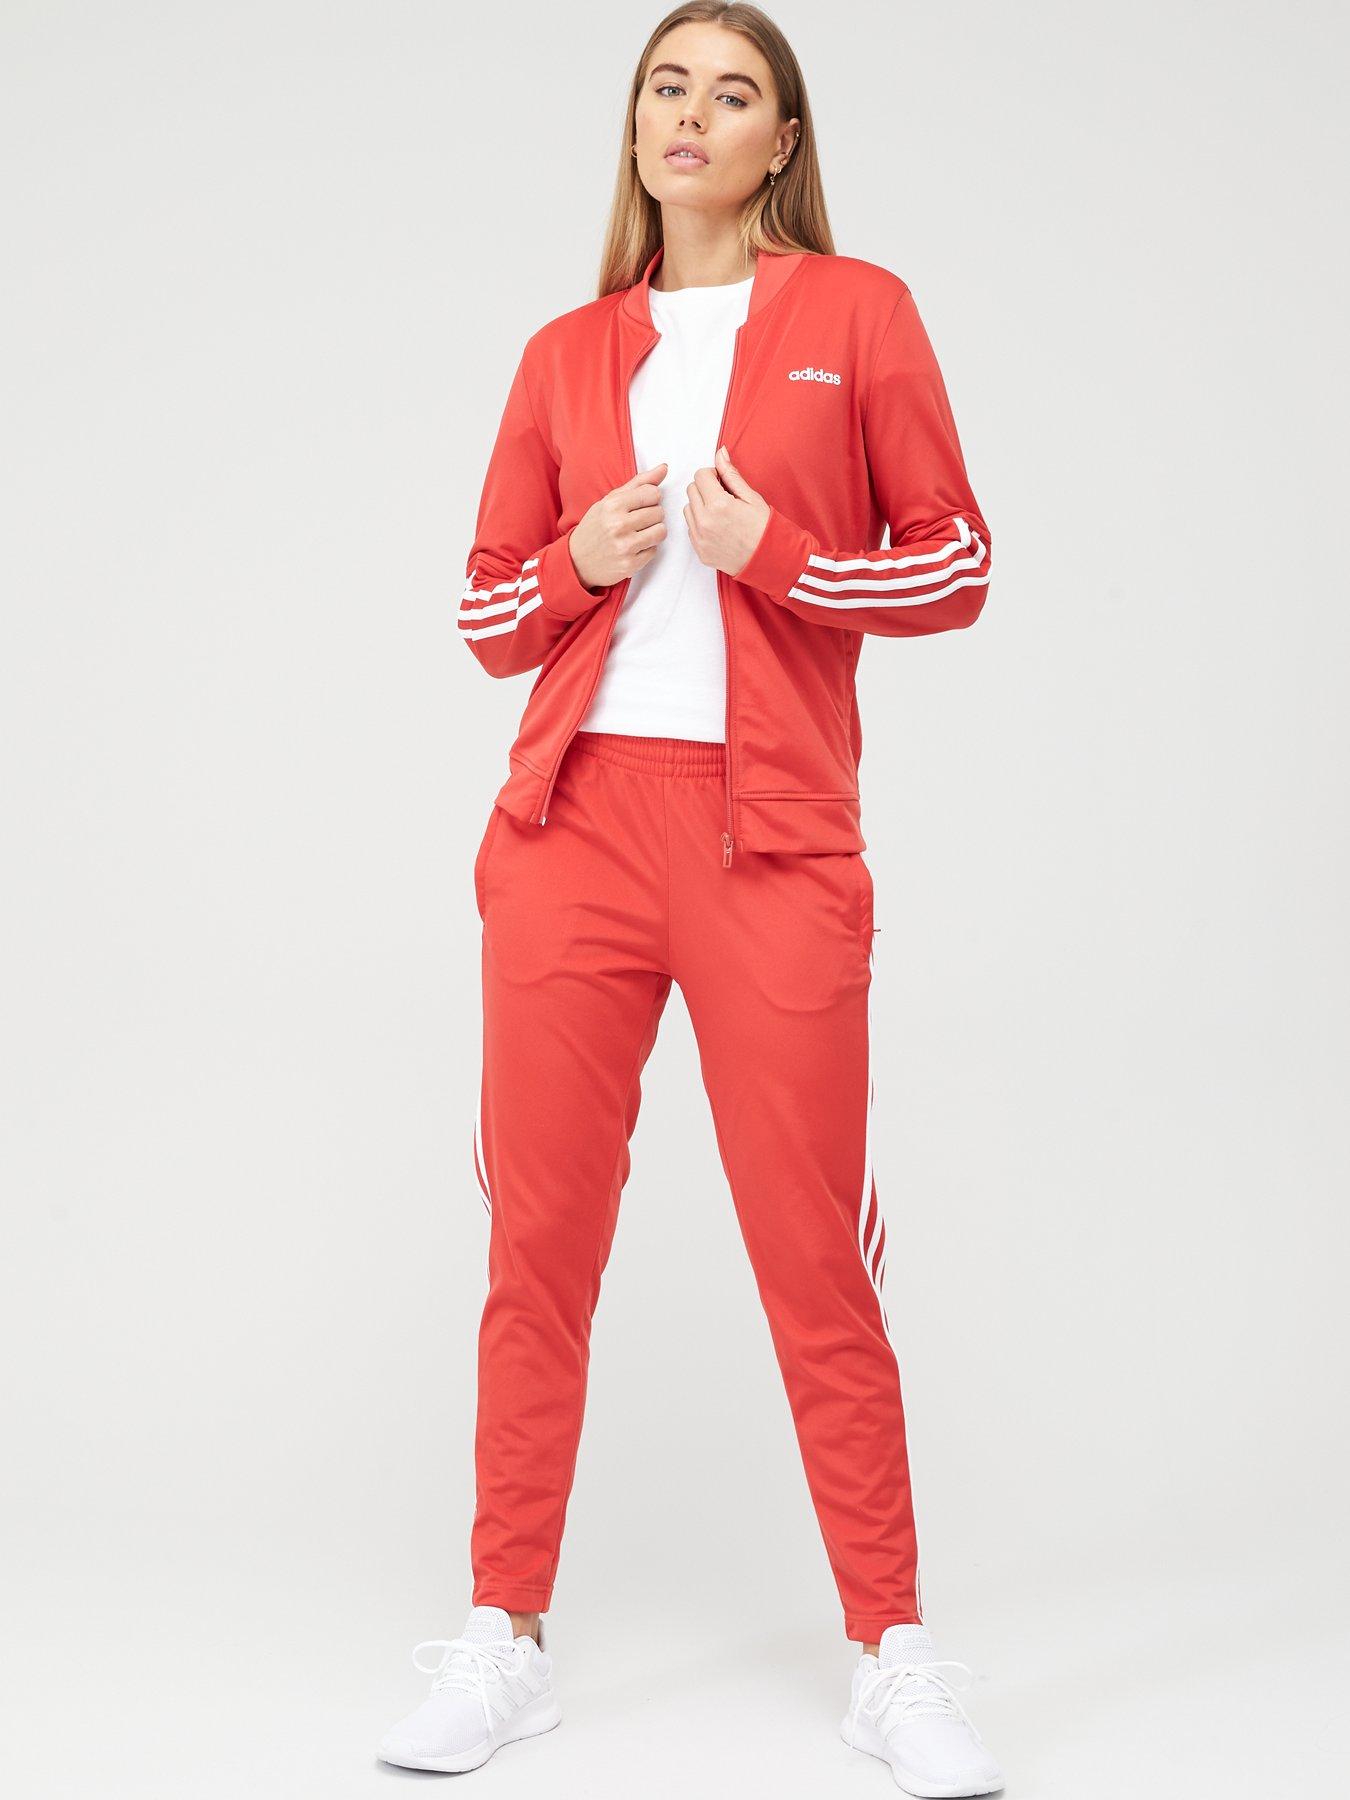 adidas tracksuit in red